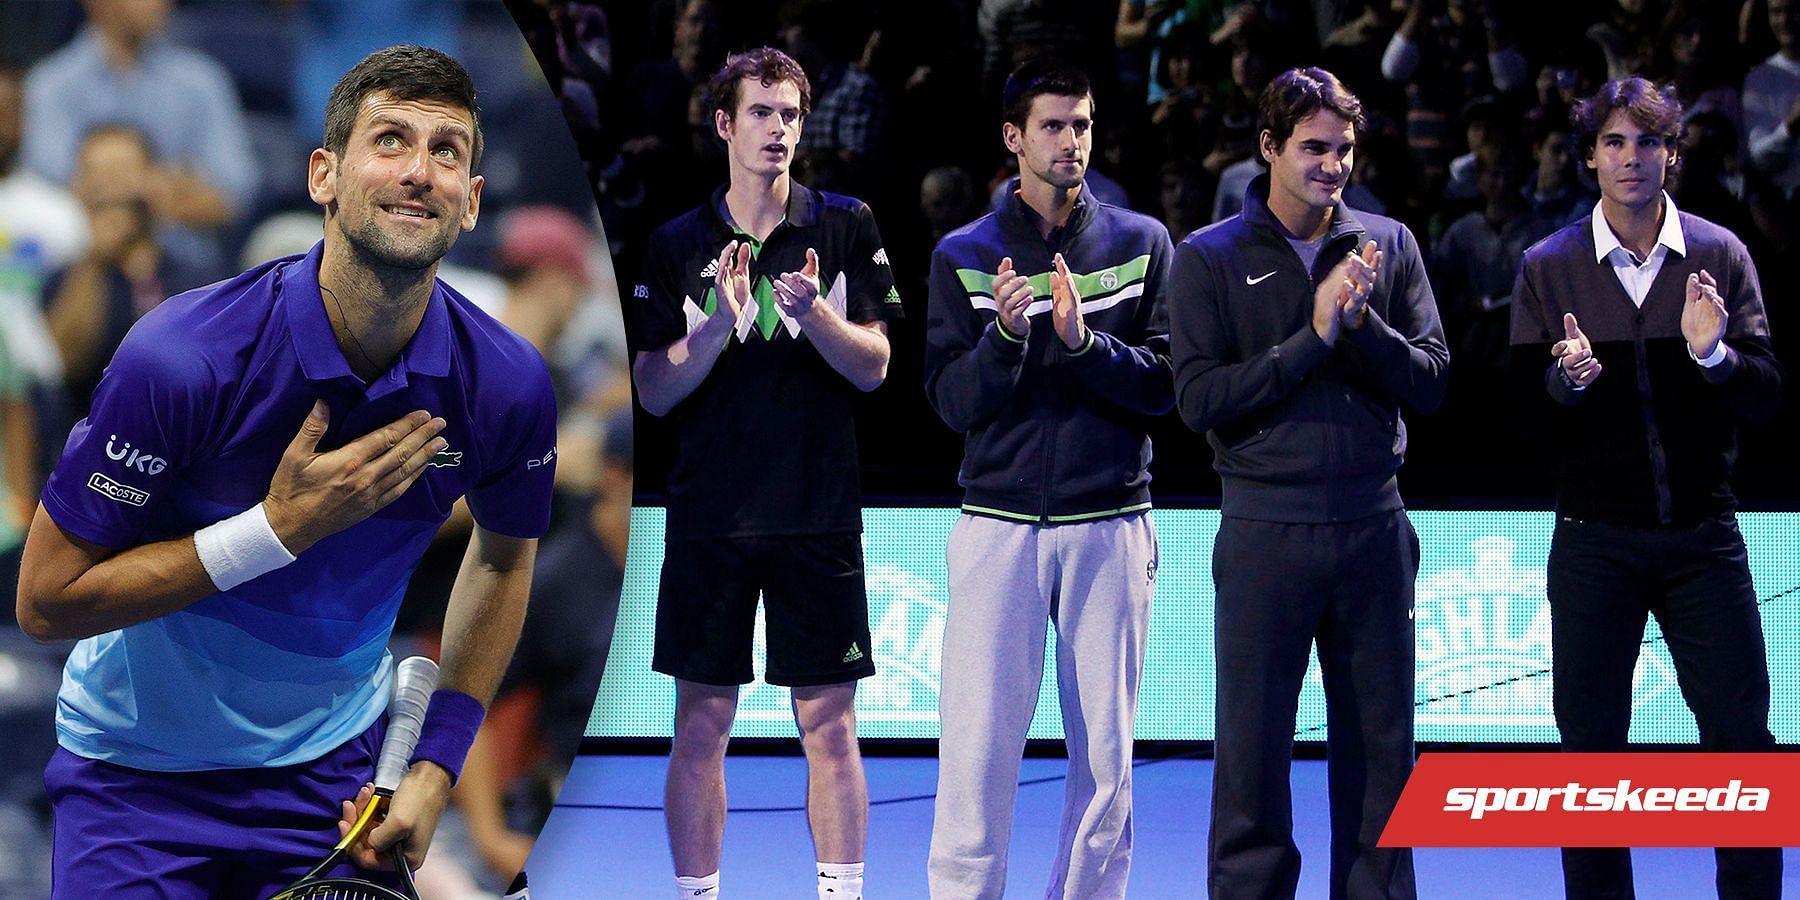 Novak Djokovic is confirmed to appear at the 2022 Laver Cup alongside the other Big-4 members